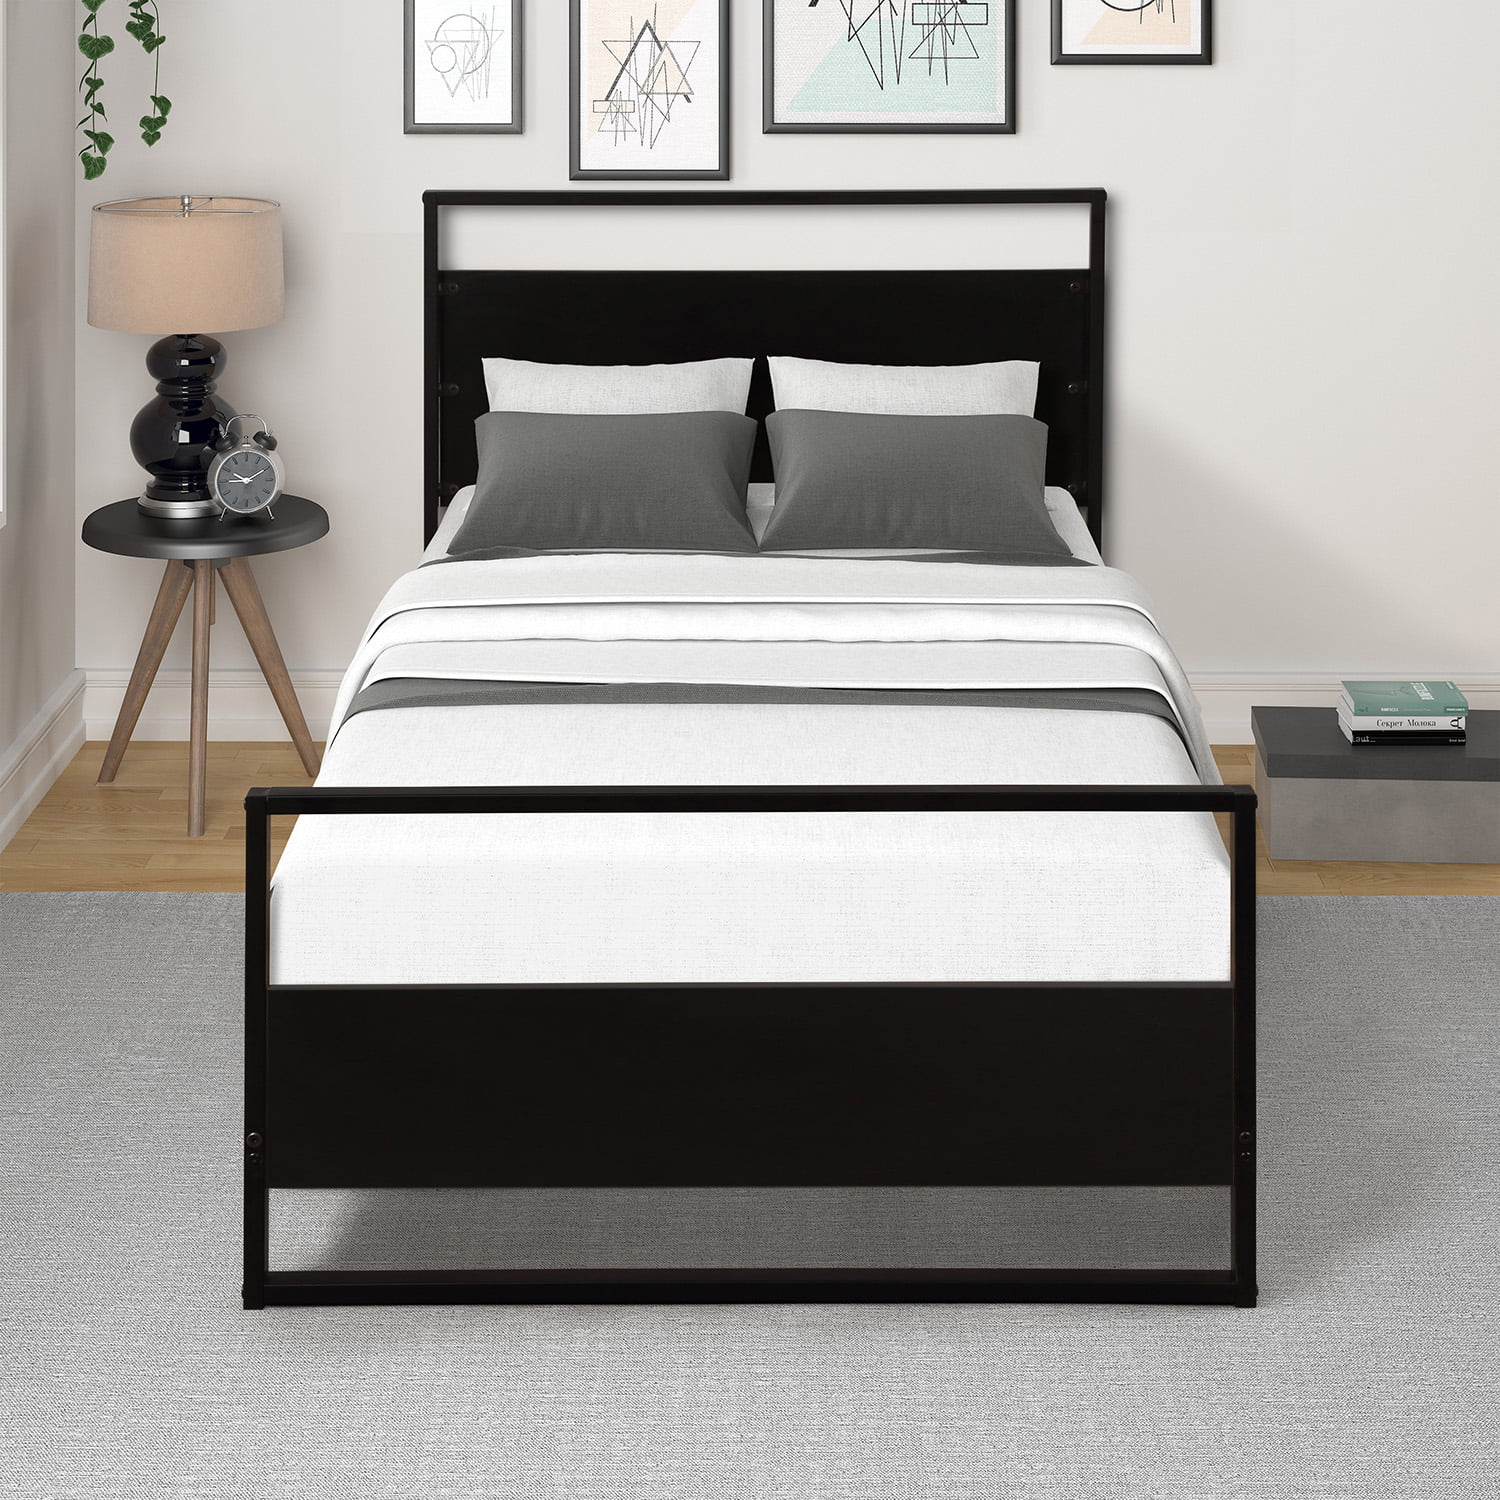 36 6 Inch Segmart Twin Bed Frame With, Raised Full Bed Frame